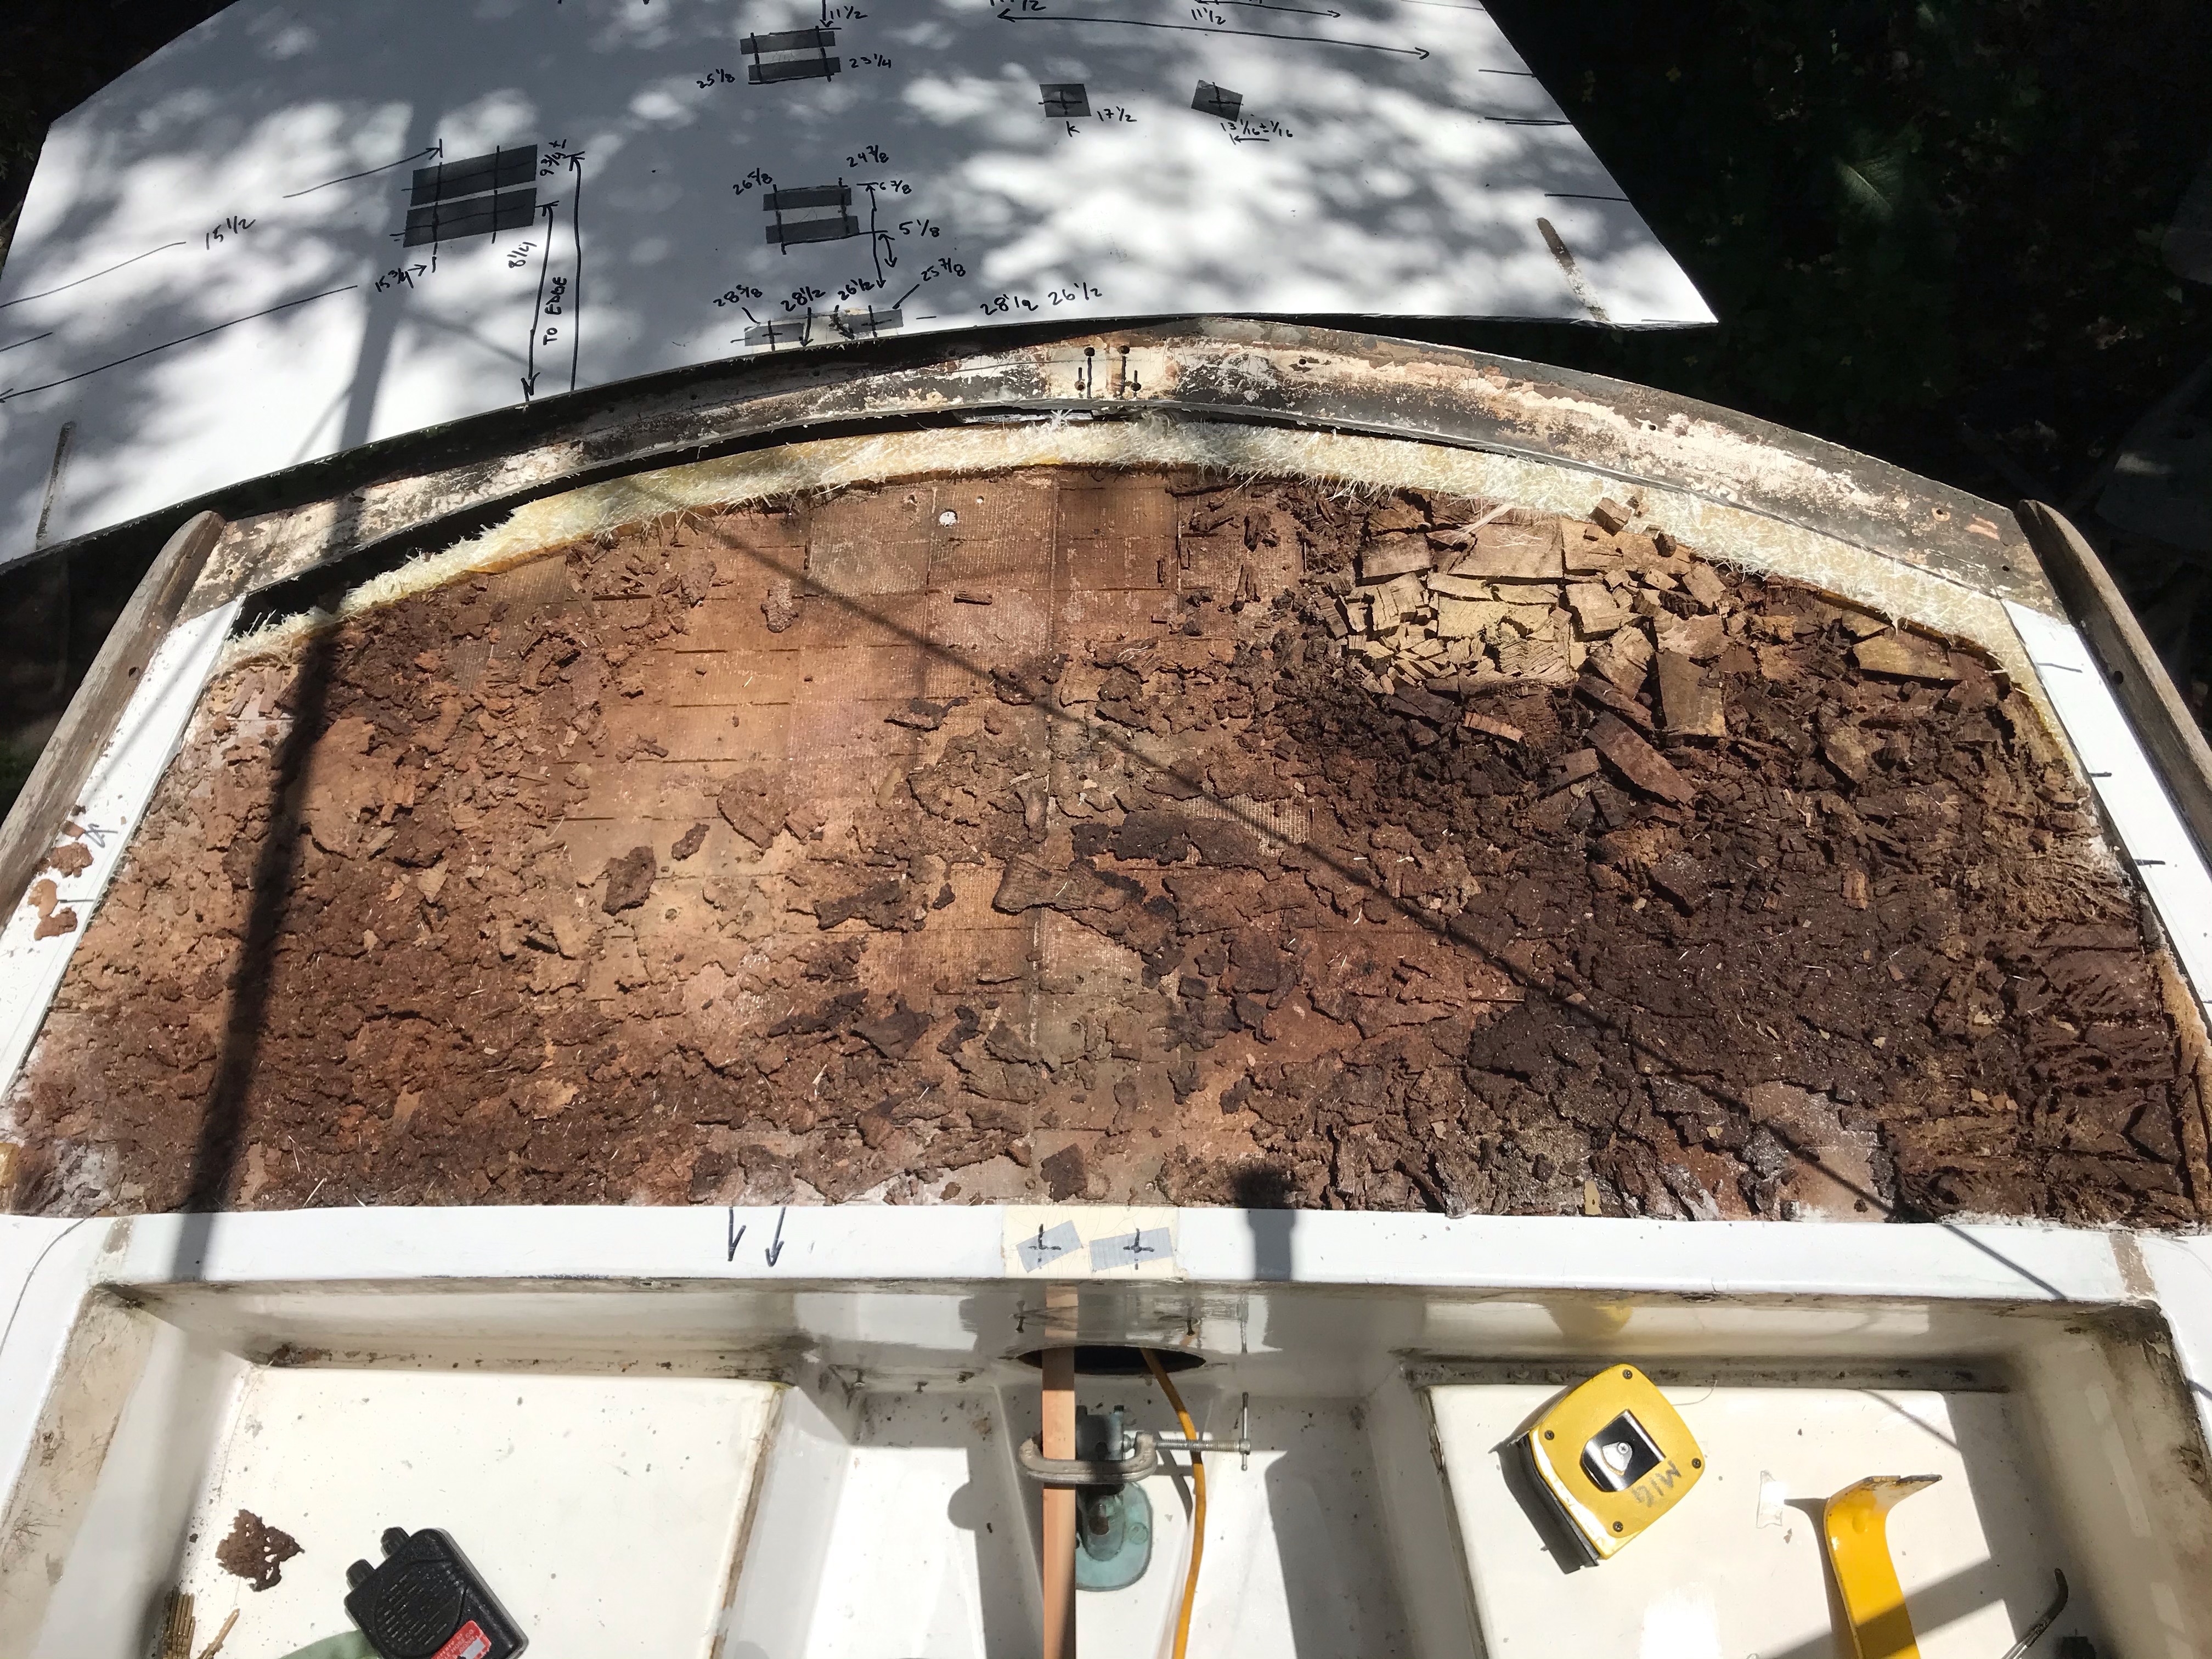 deck skin removed and punky core exposed.